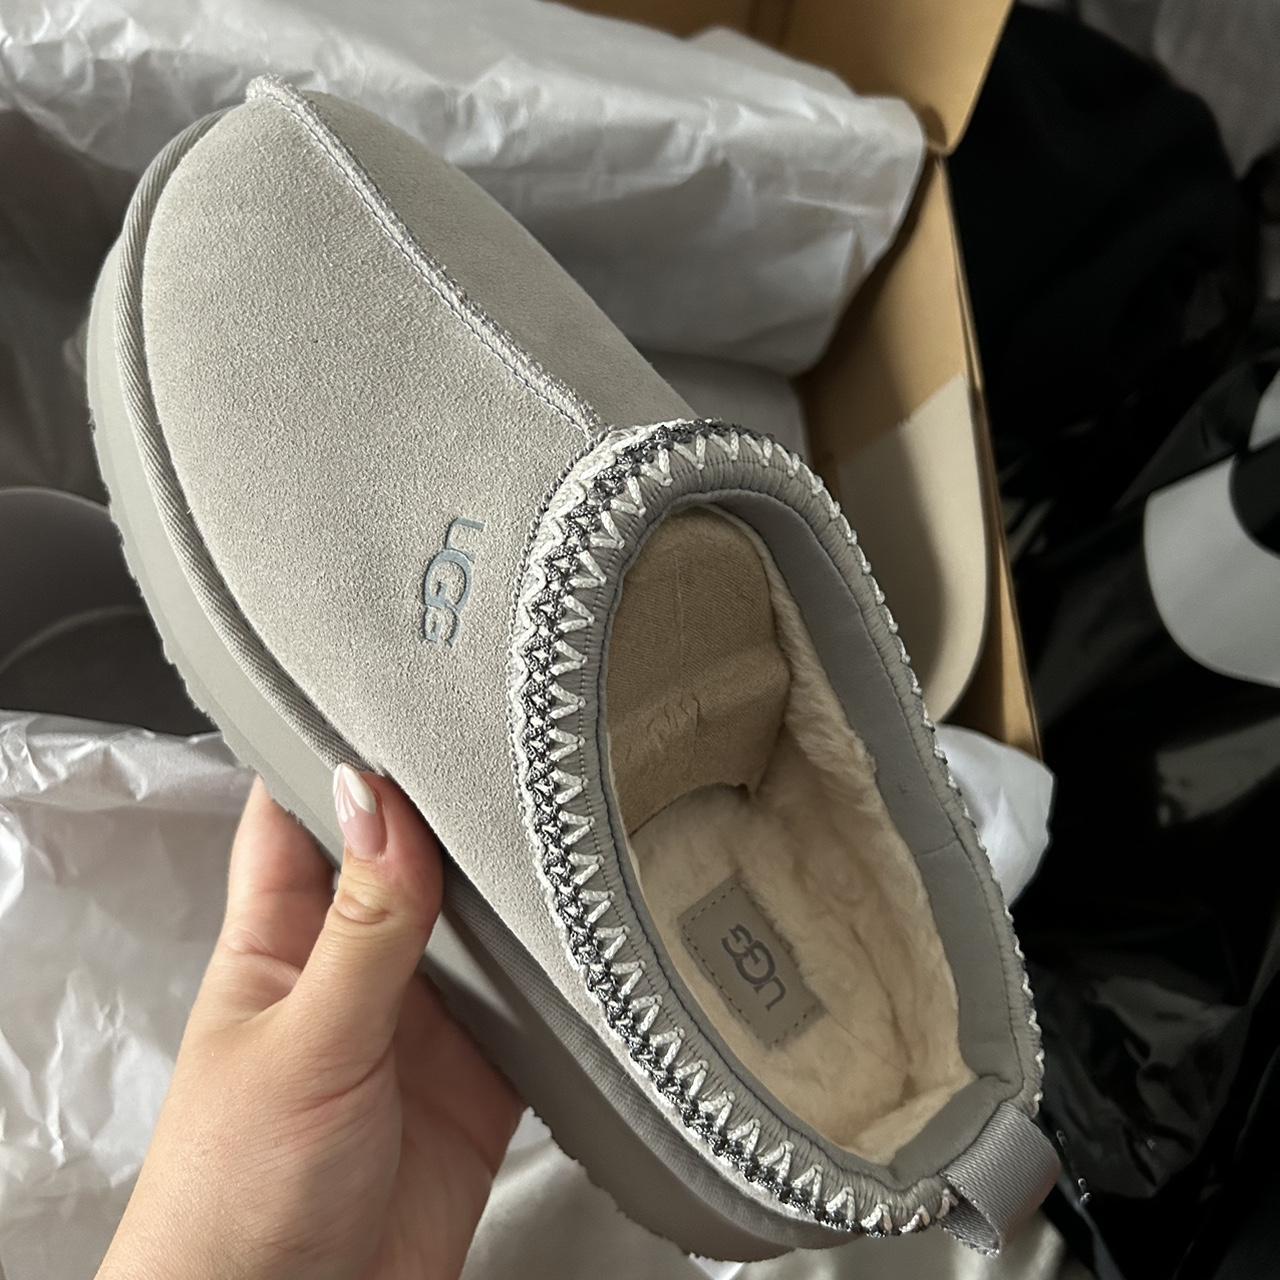 Ugg Tazz in the colour “goat” Brand new Never worn... - Depop